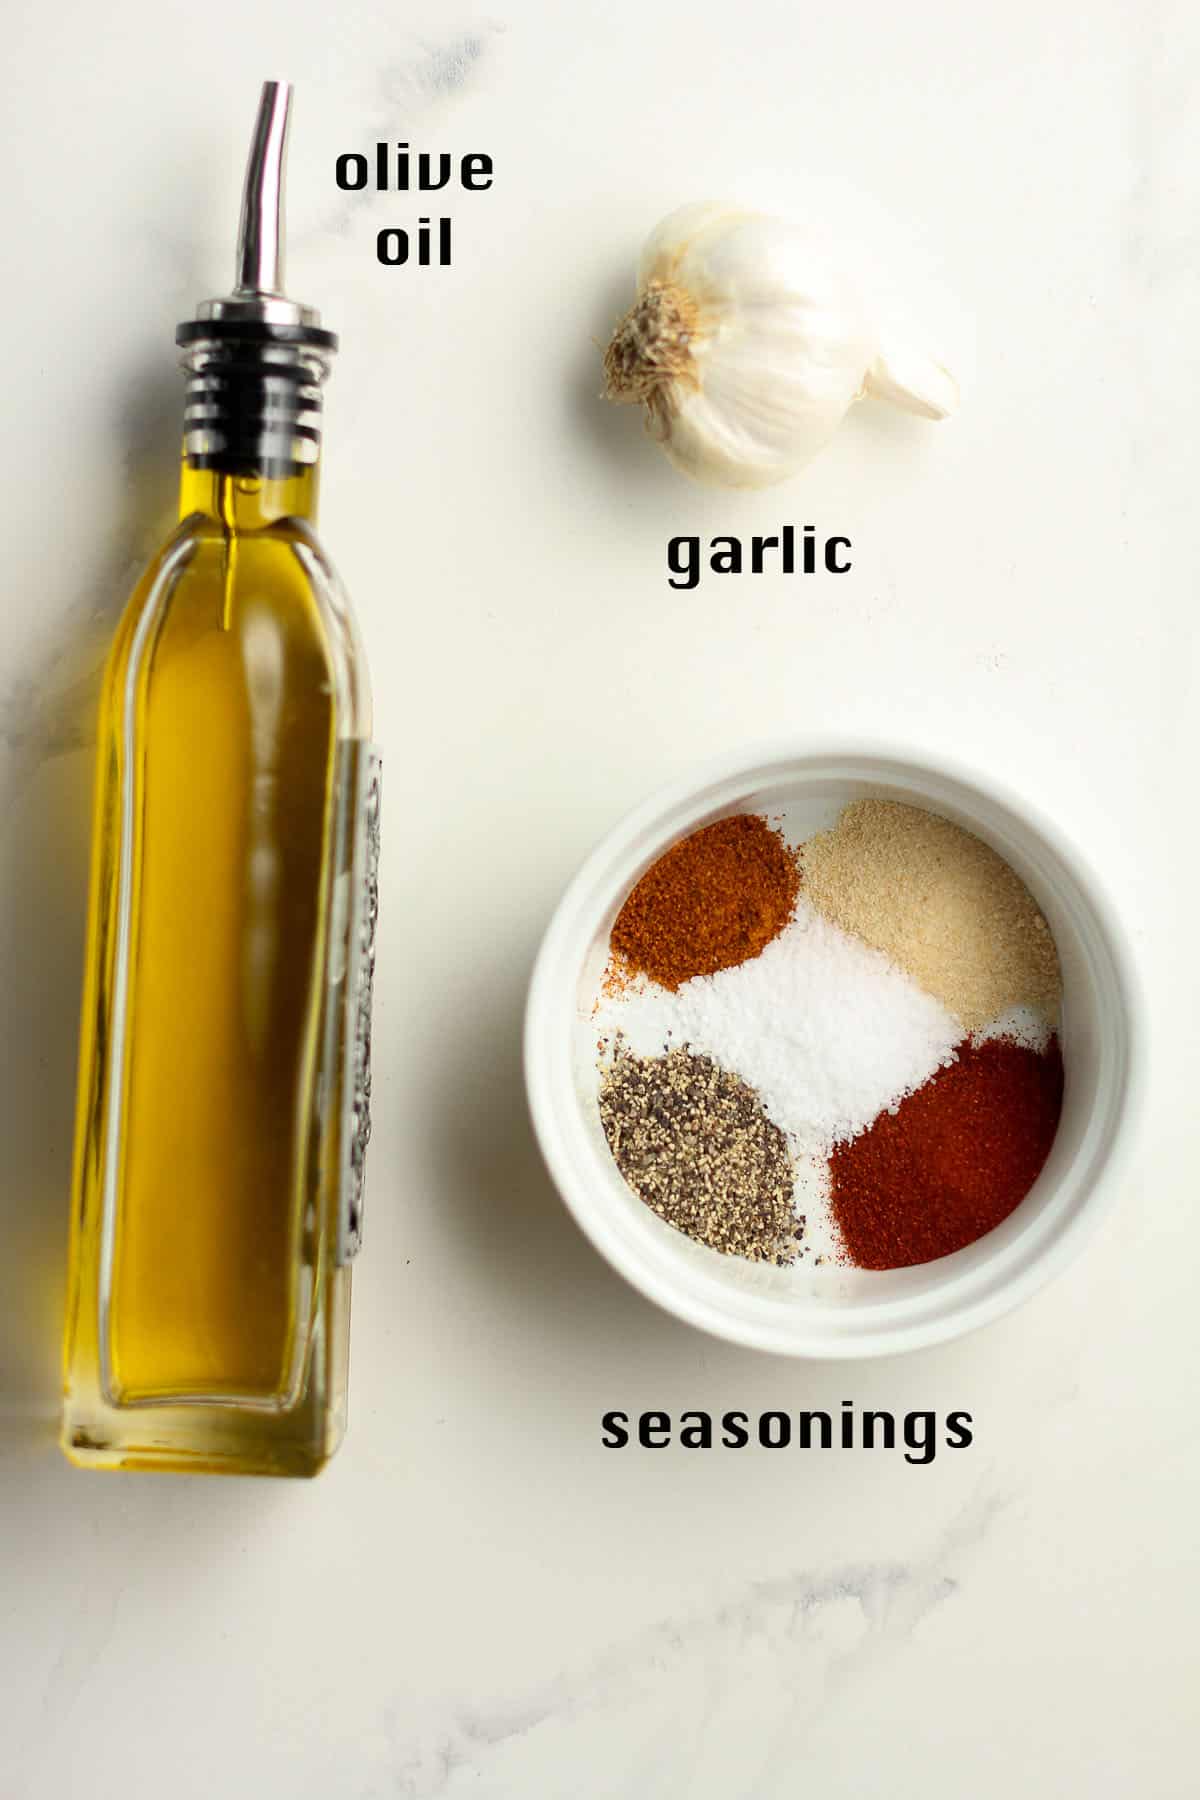 Other ingredients for the fries - olive oil, garlic, and seasonings.